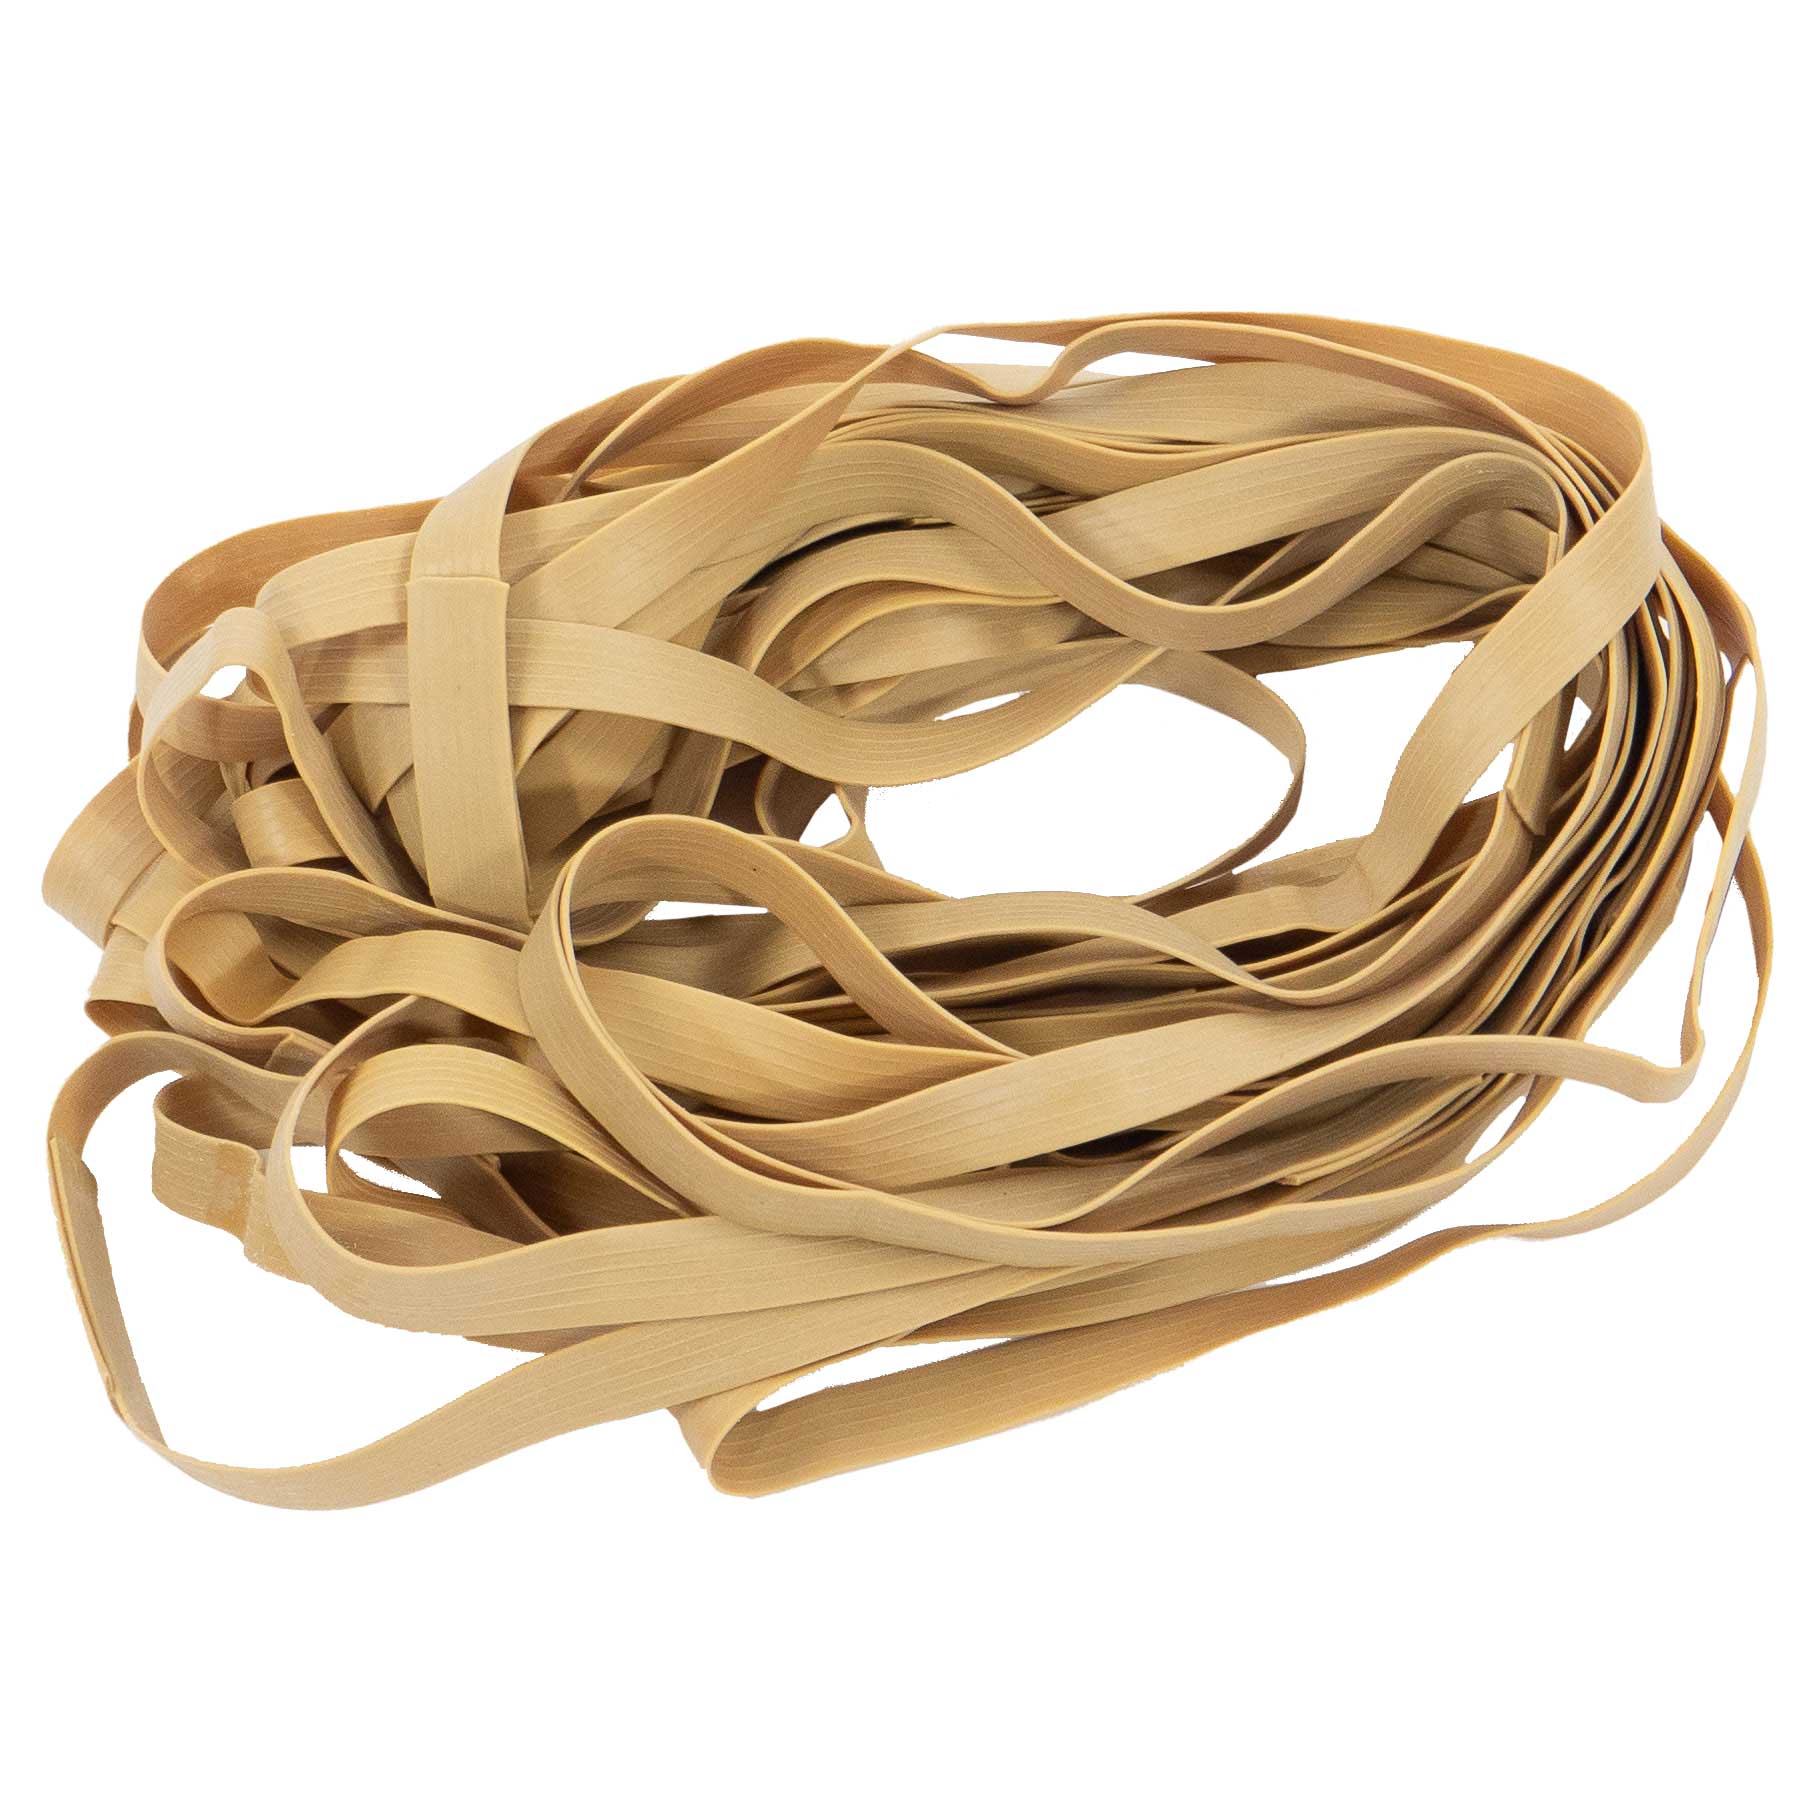 Large Rubber Bands for Moving, 25 - 50 Length